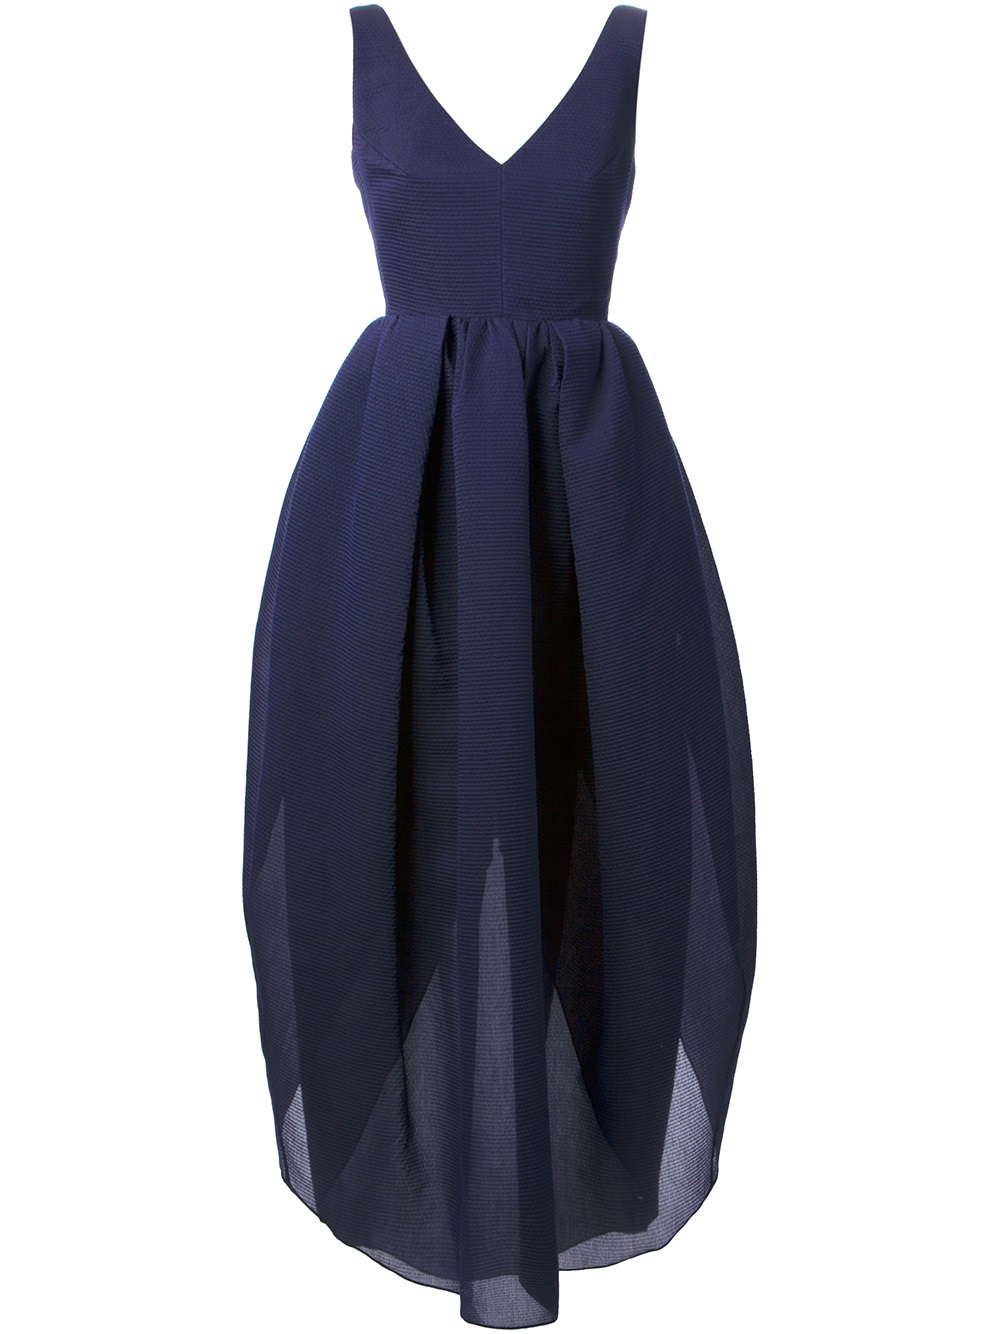 Lyst - Carven Back Bow Dress in Blue